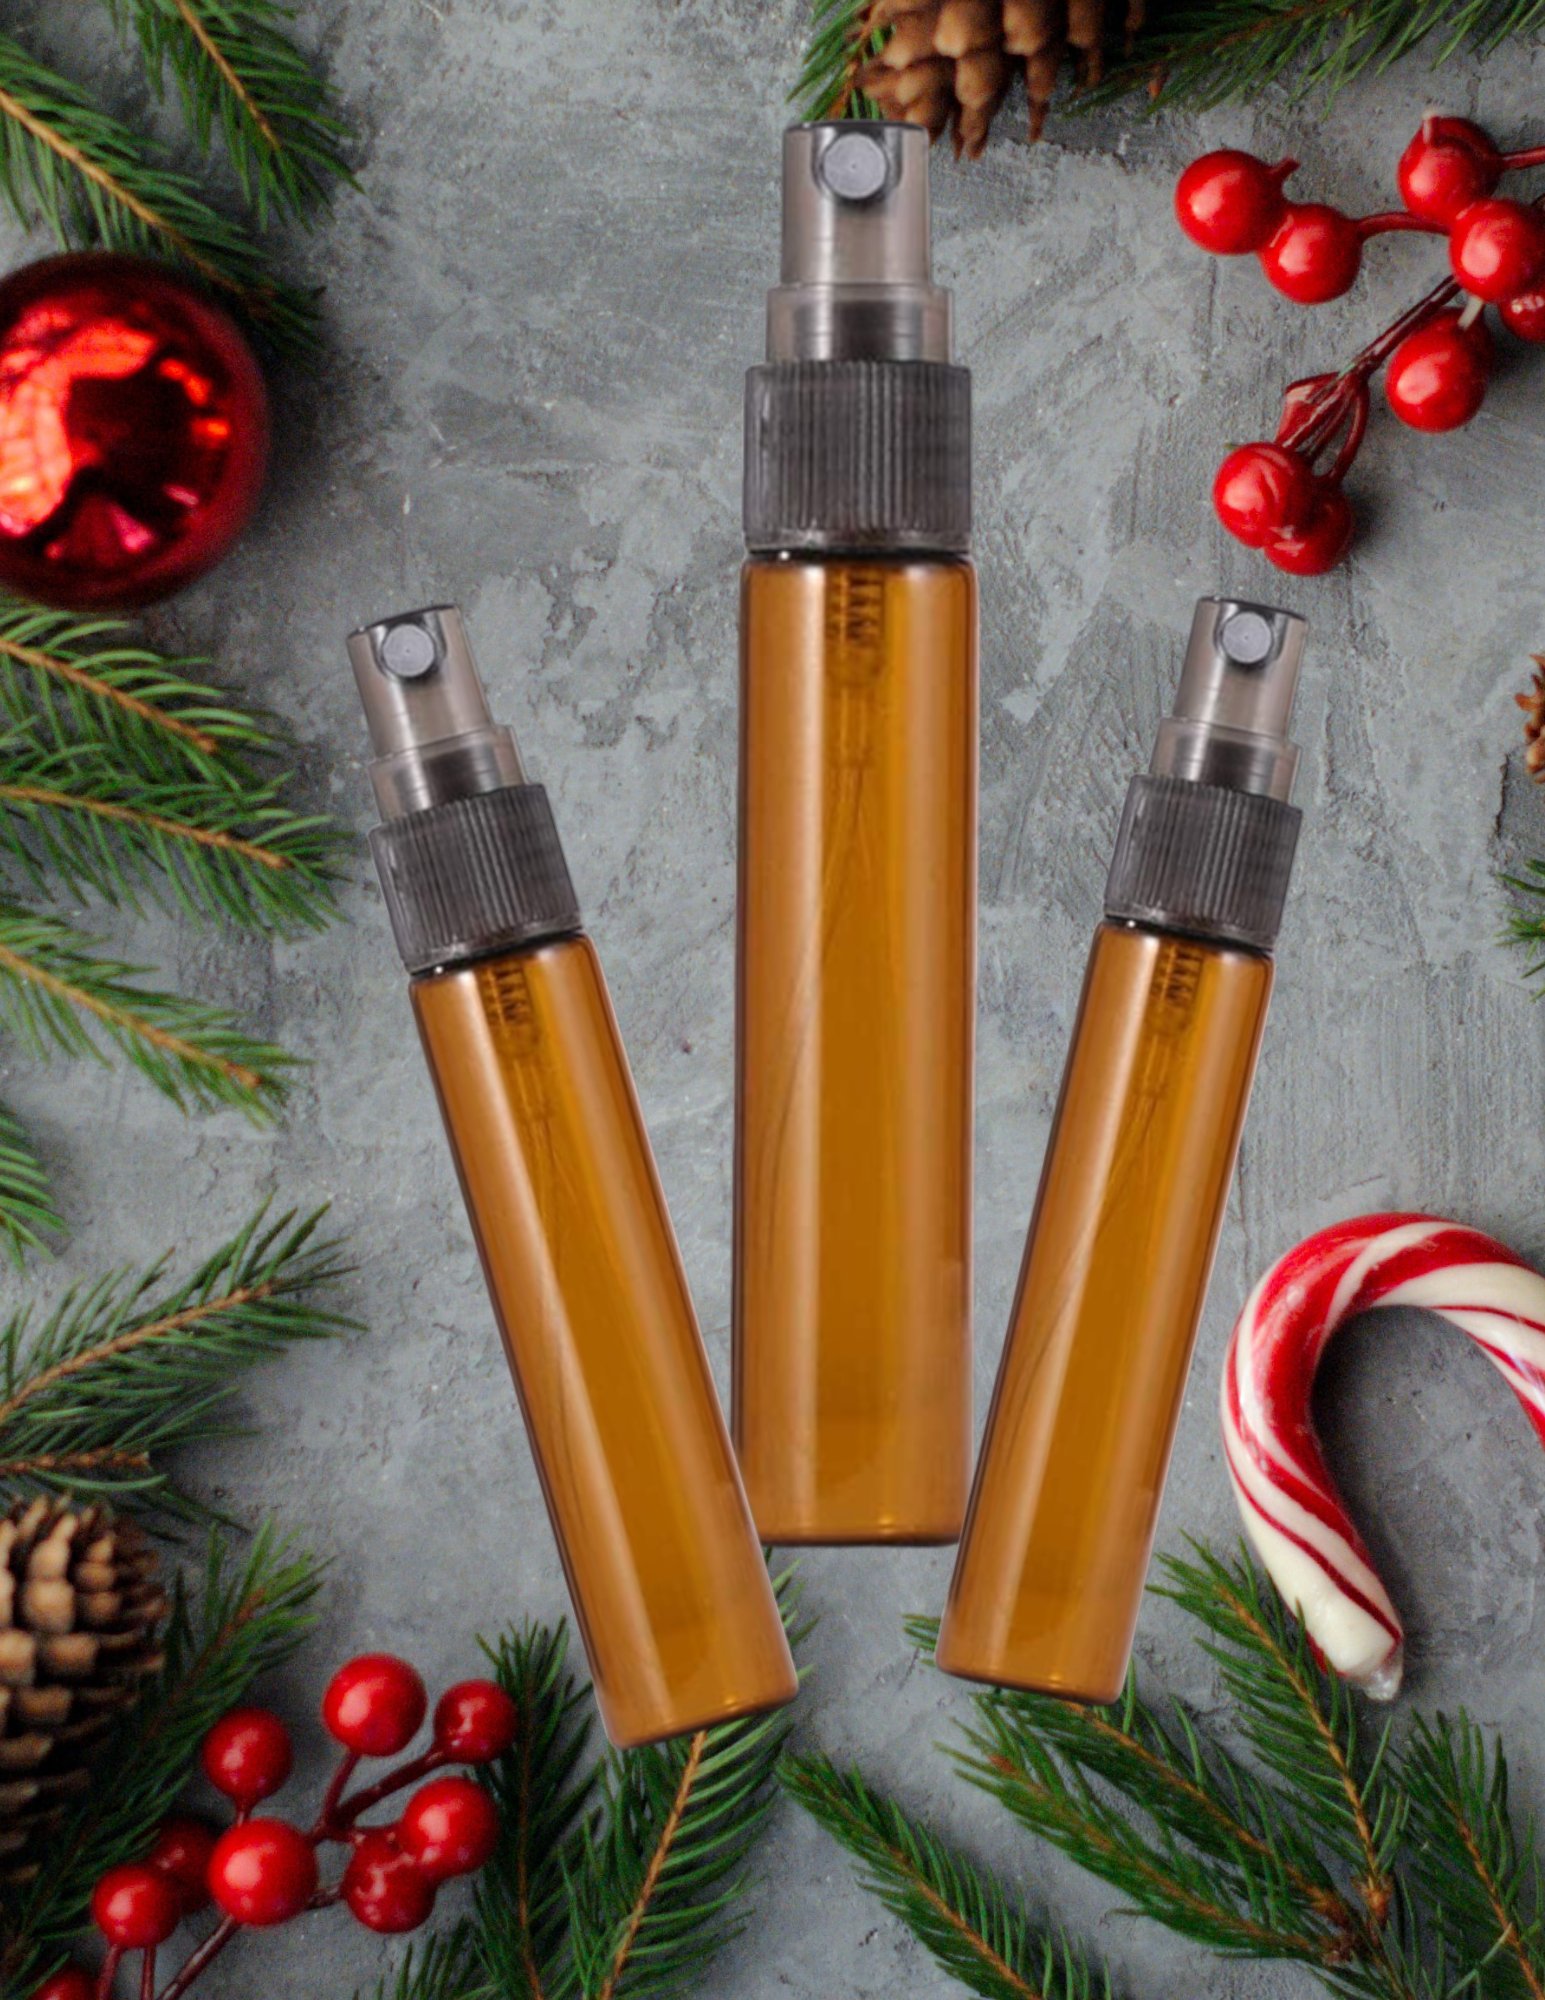 Three perfume vials on a winter holiday background